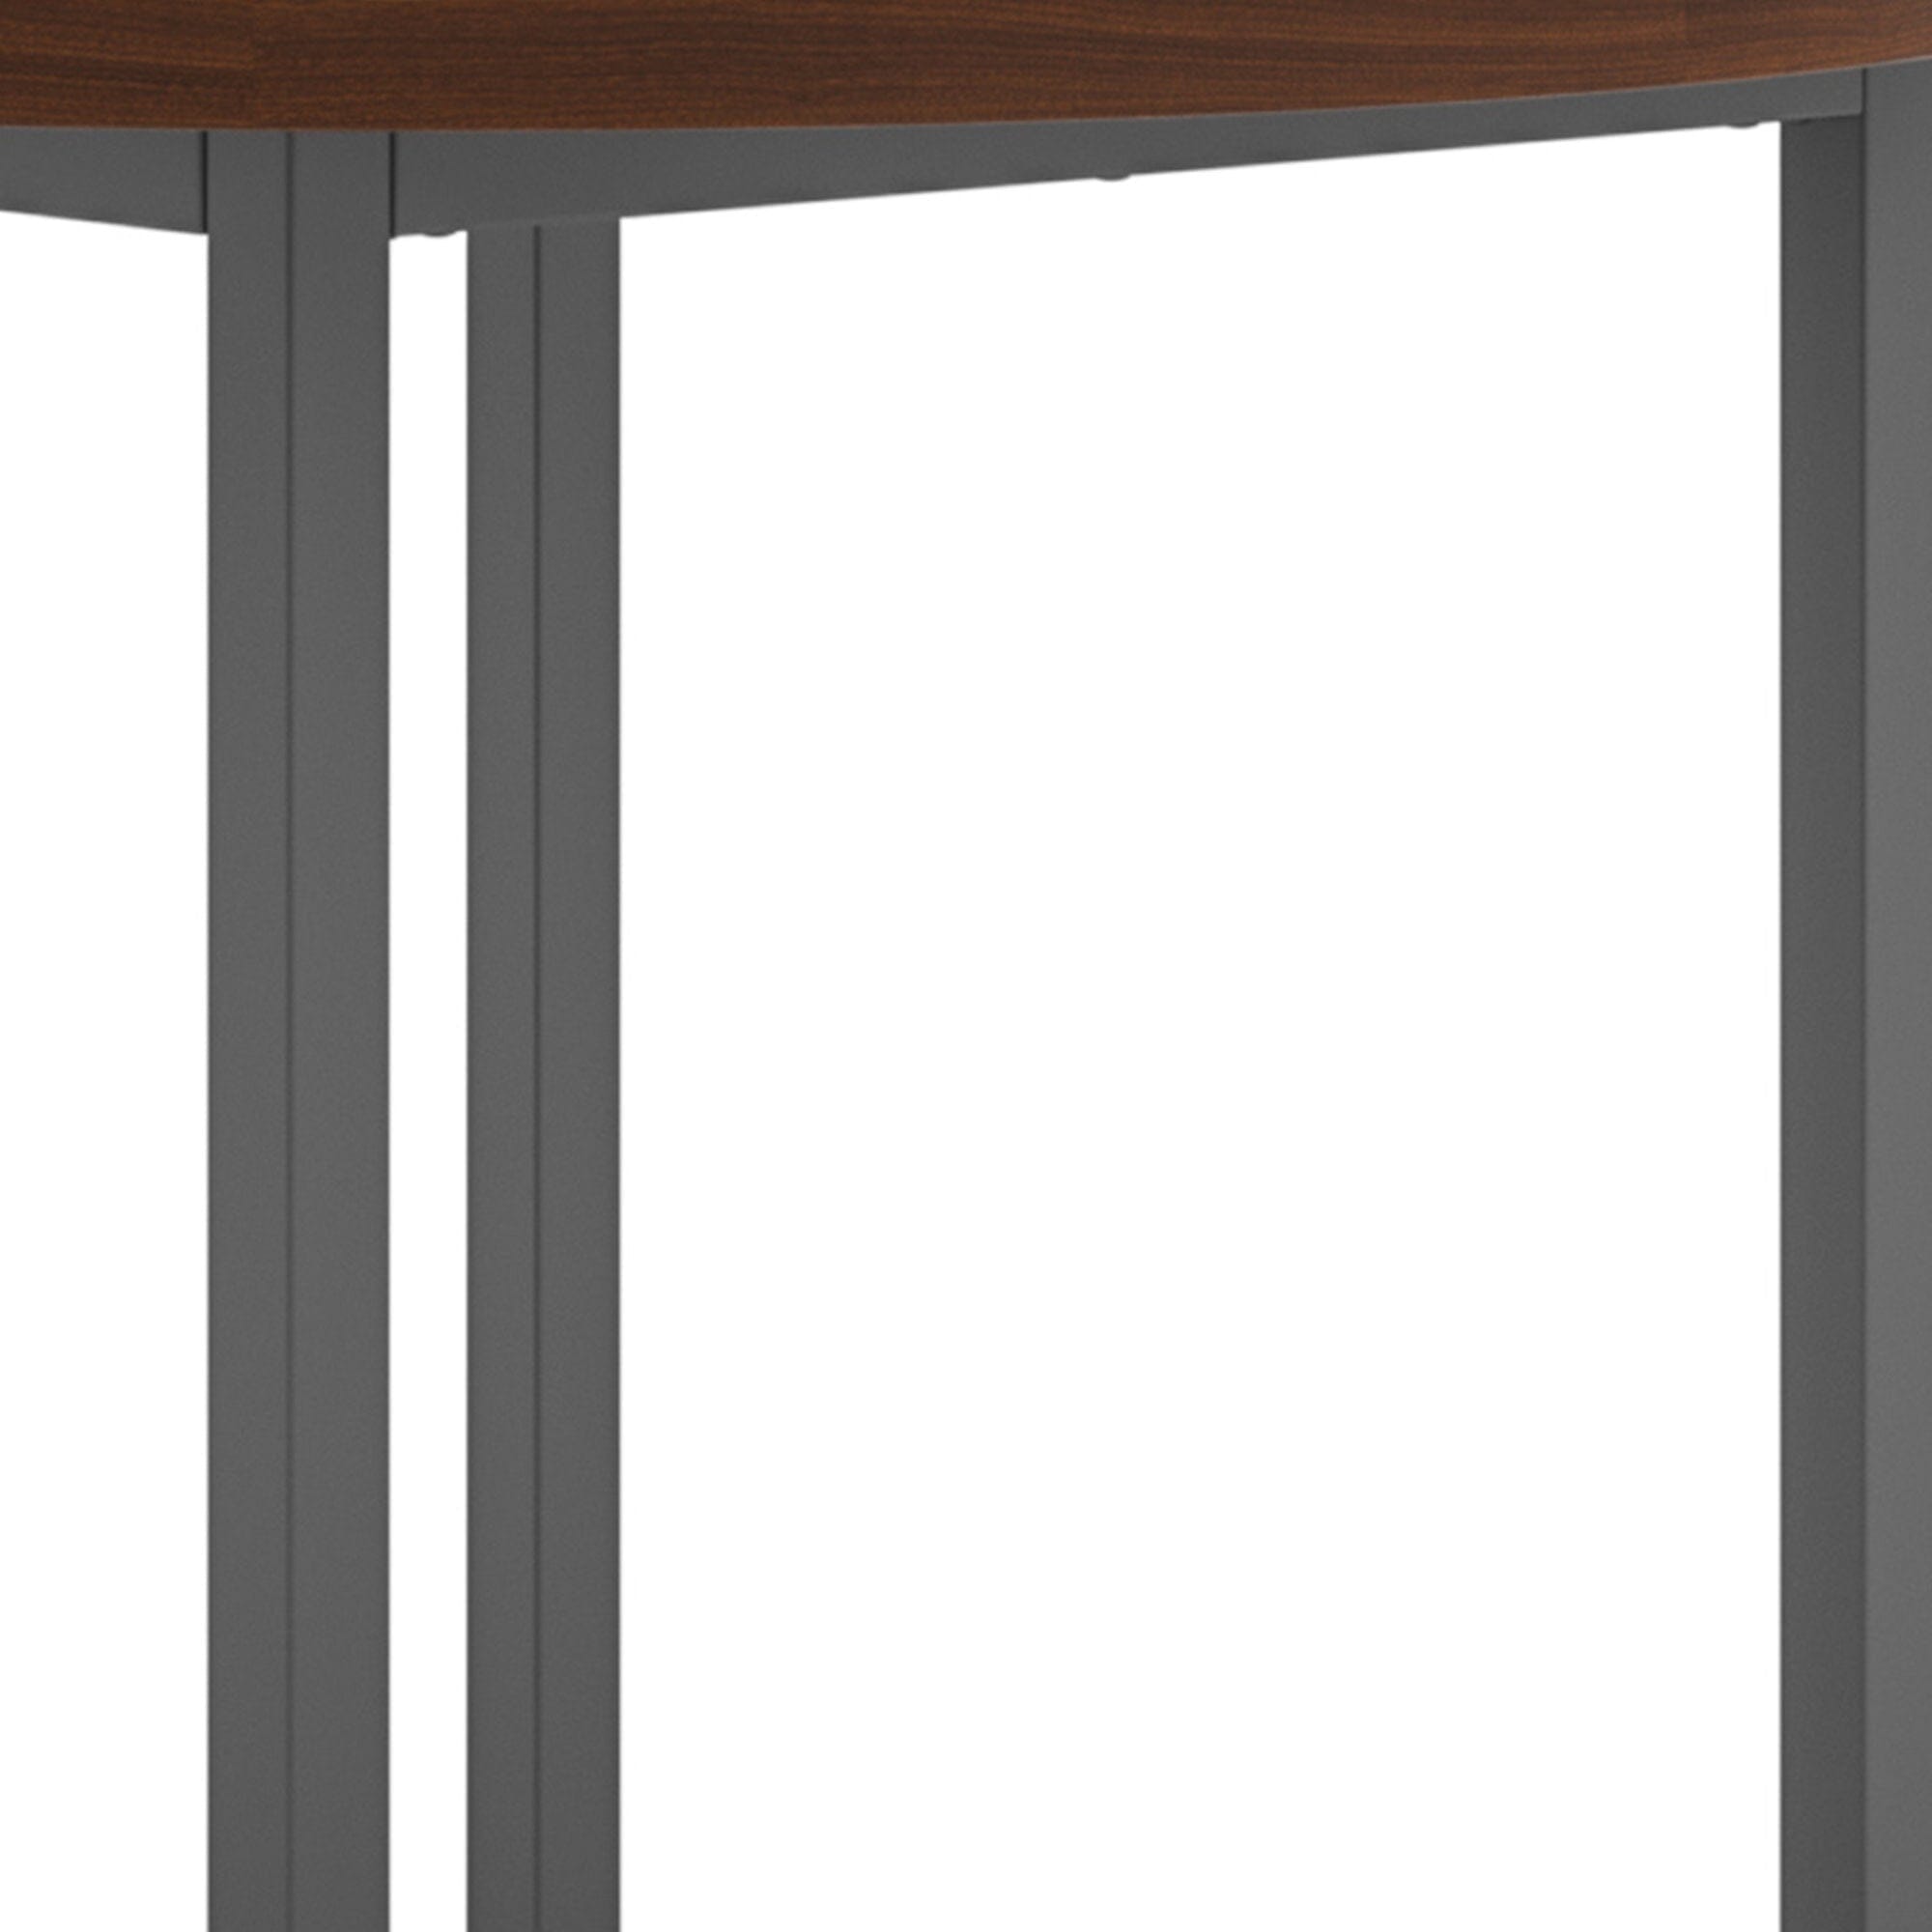 Modern & Contemporary Dining Table By Merge Dining Table Merge